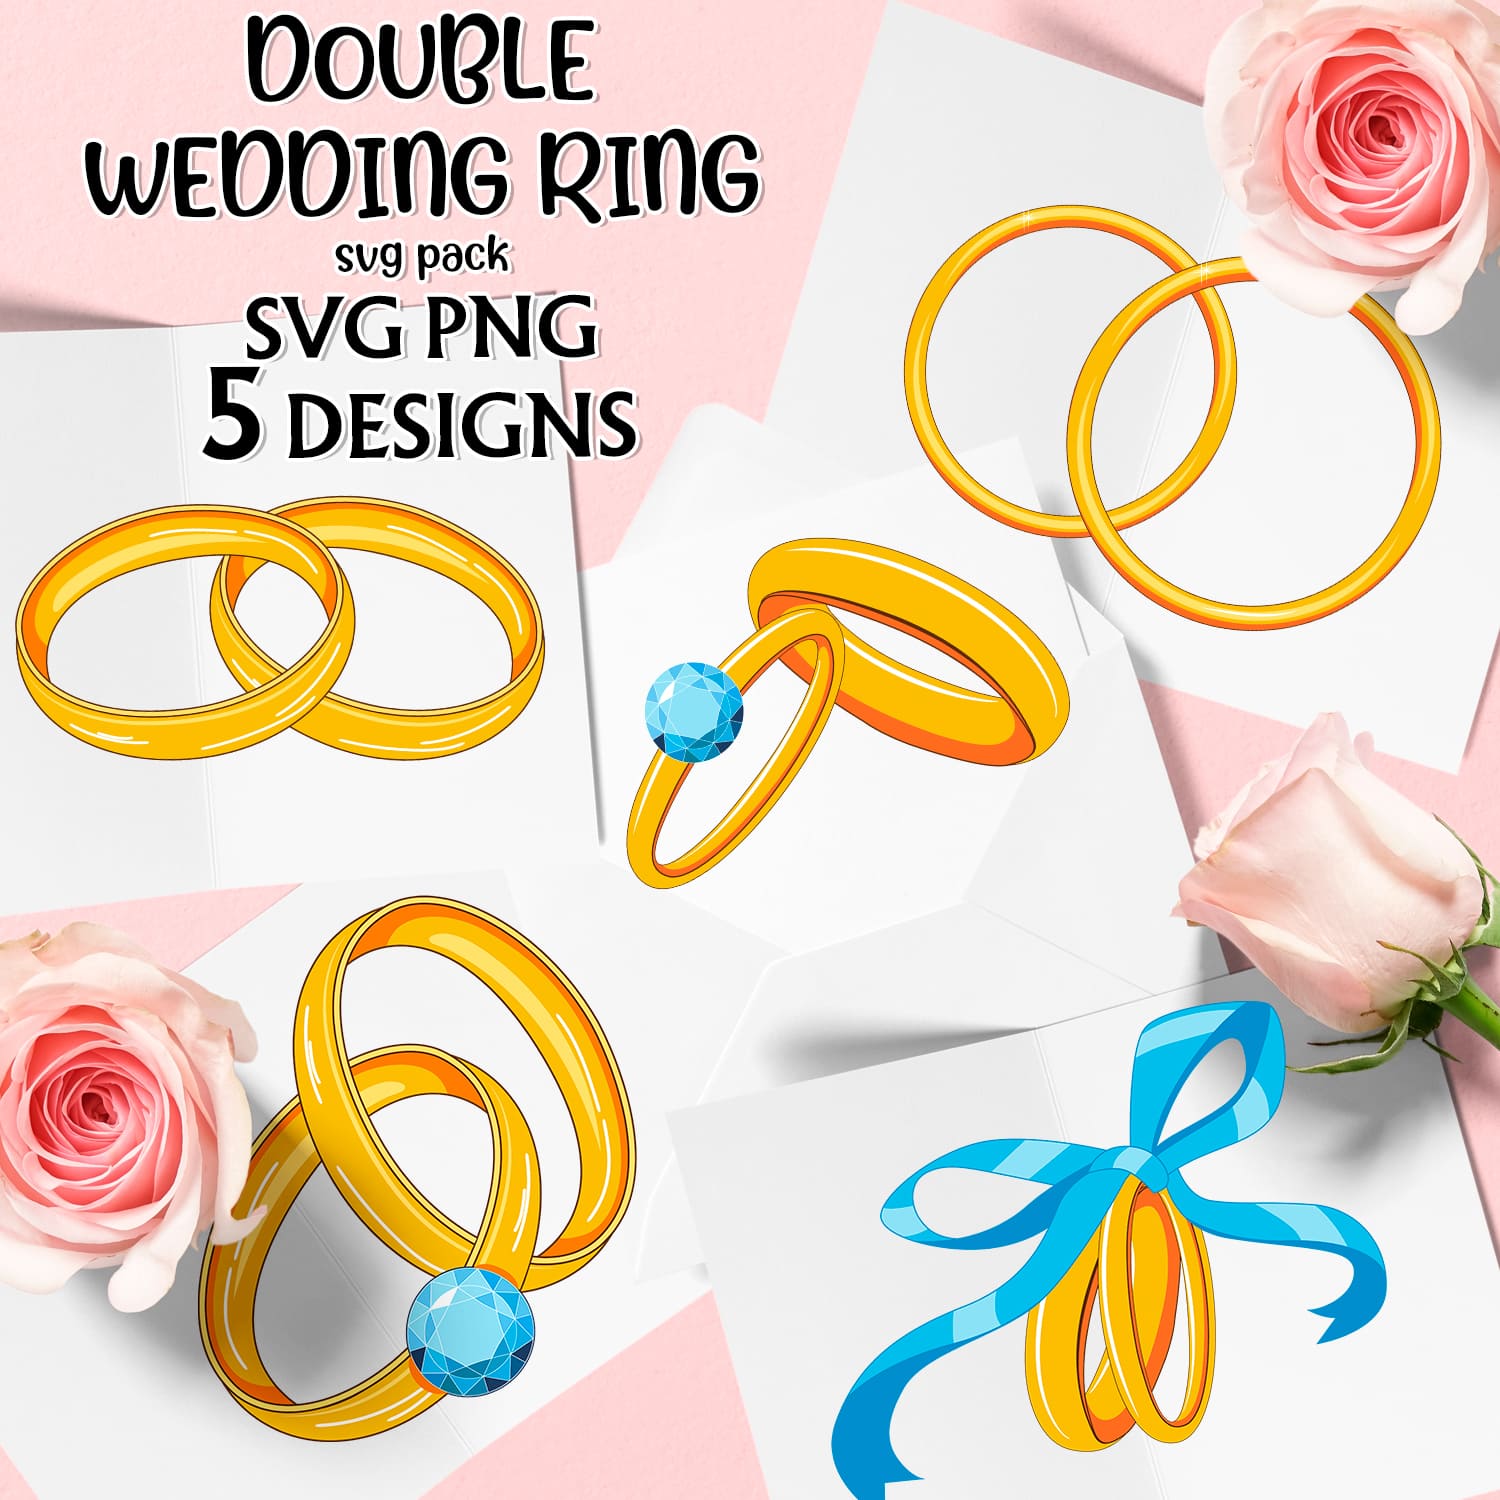 Double Wedding Ring SVG - pinterest image preview.